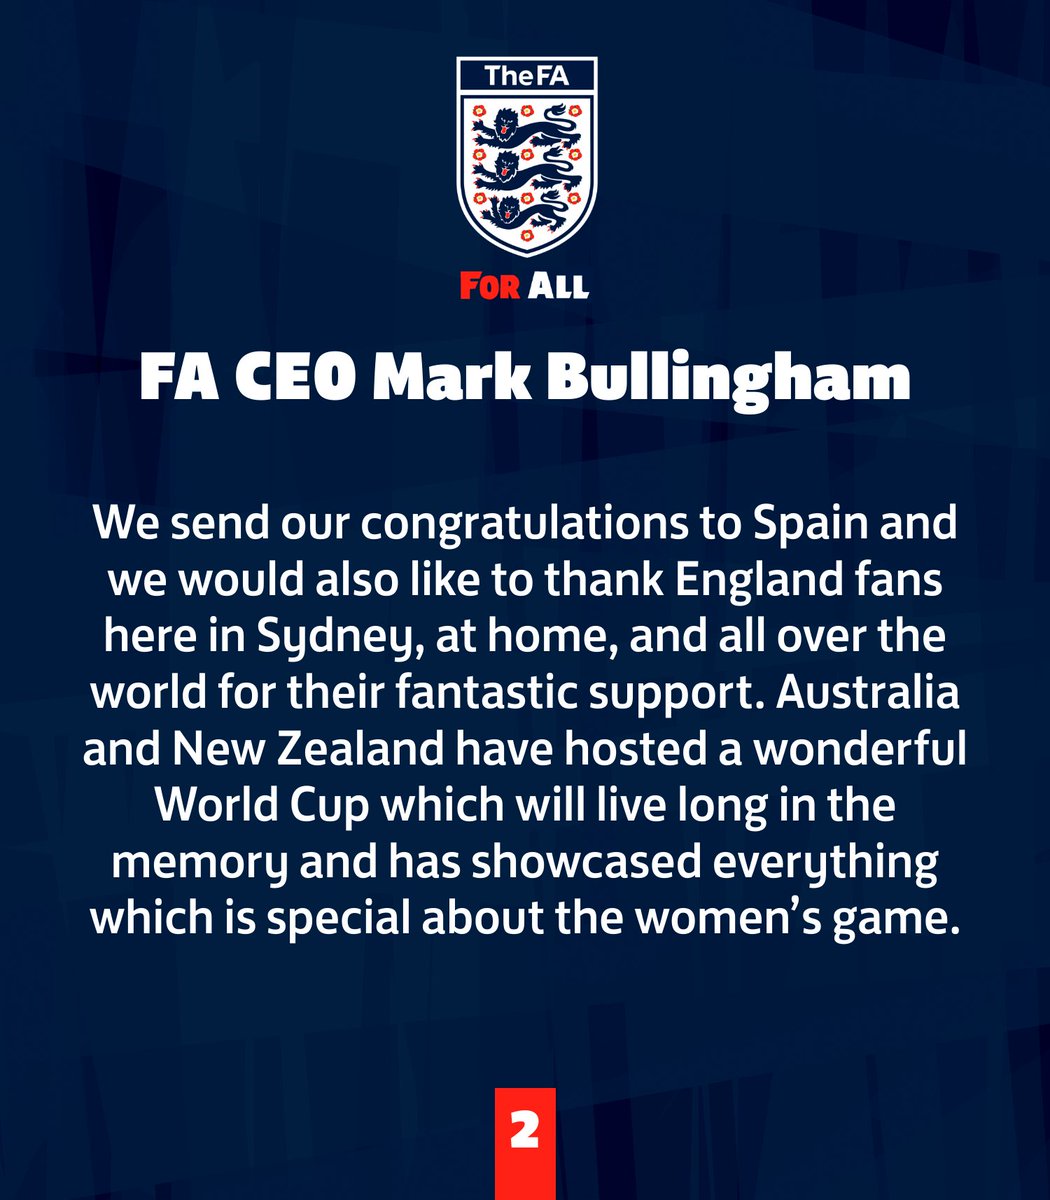 'Everyone is hurting this evening, but we are so proud of the Lionesses, Sarina and the whole support team.' A message from our CEO Mark Bullingham...